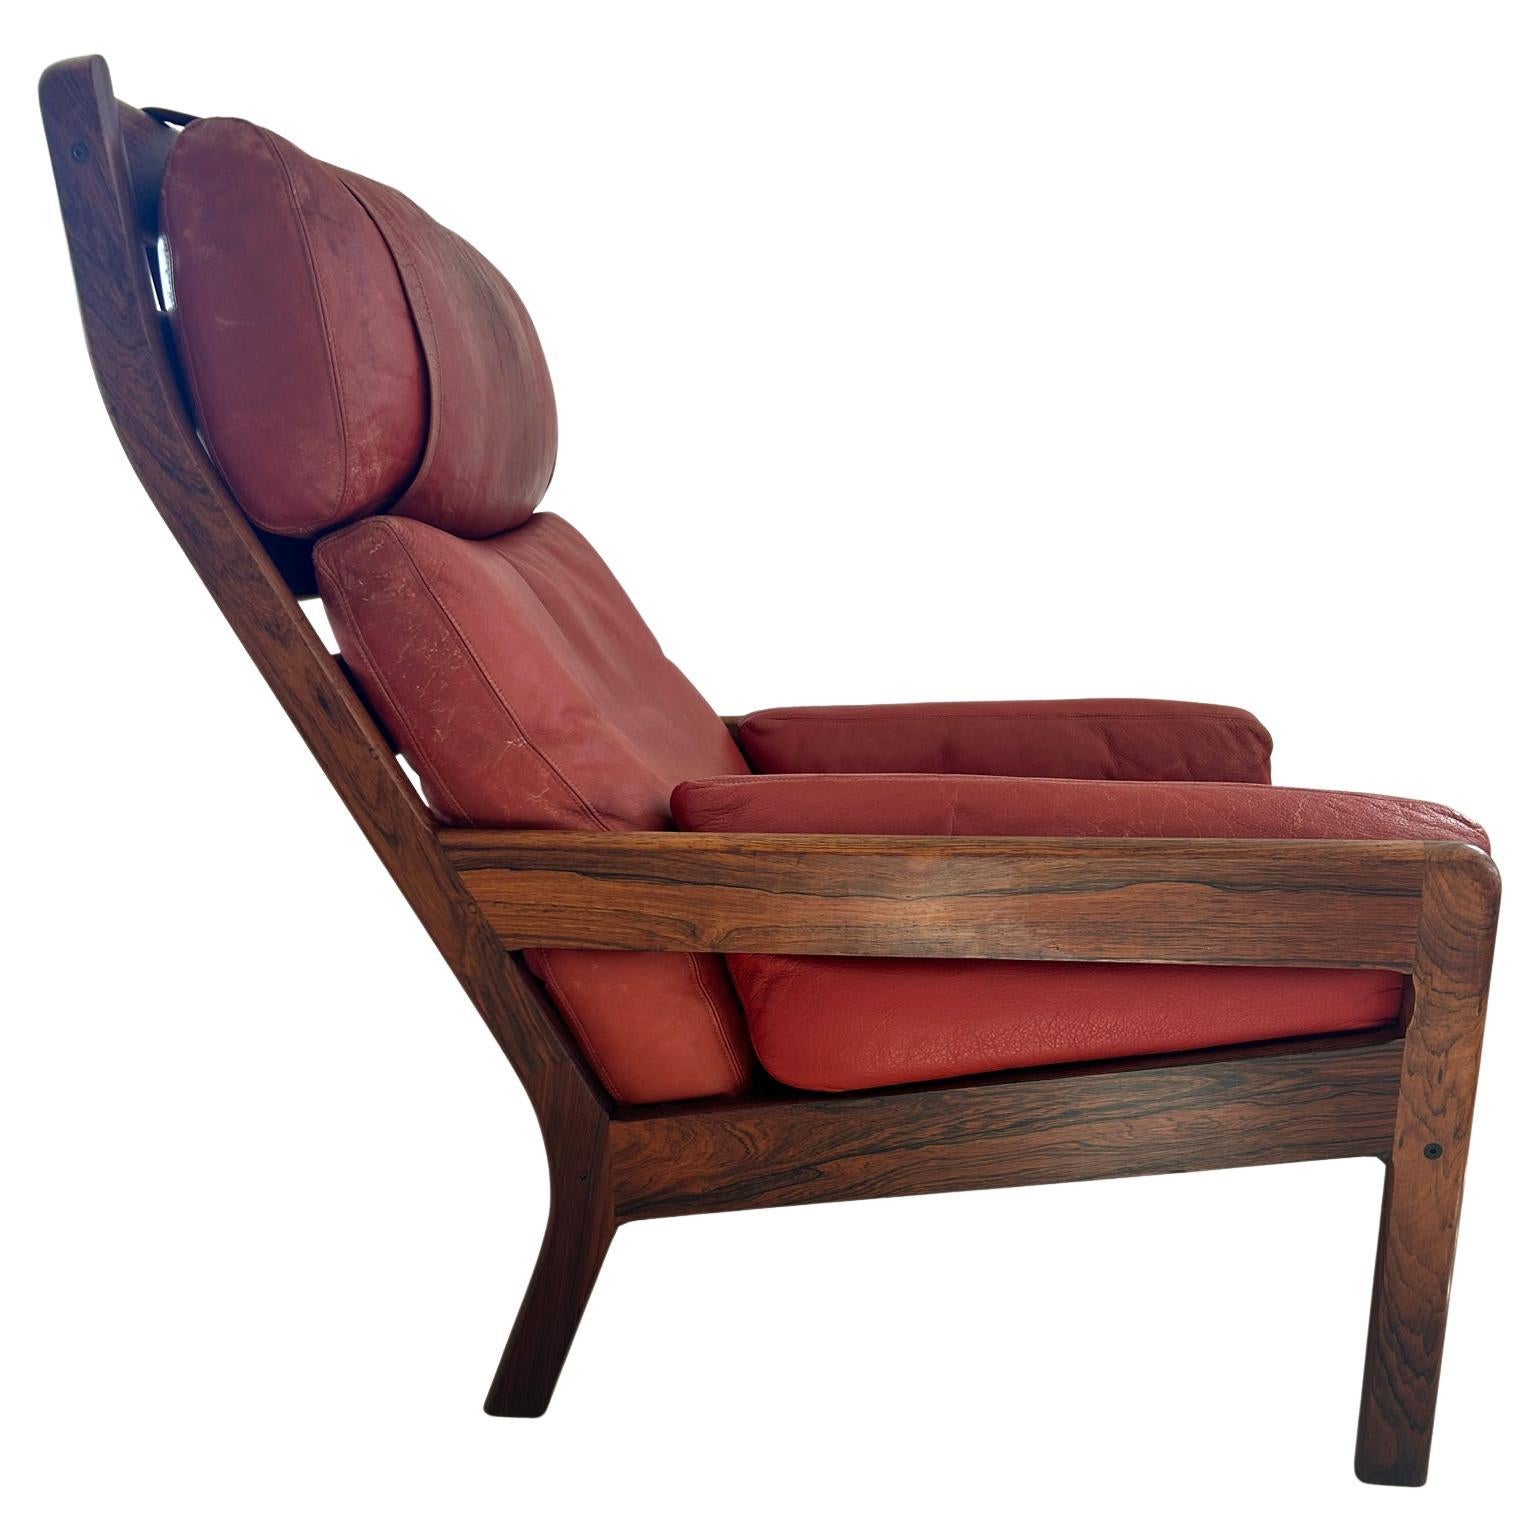 Fabulous Scandinavian Modern low lounge chair attributed to Illum Wikkelsø / Arne Norell c. 1960 Solid Rosewood frame and red leather cushions. Made in Denmark. Located in Brooklyn NYC

Dimensions: H 37